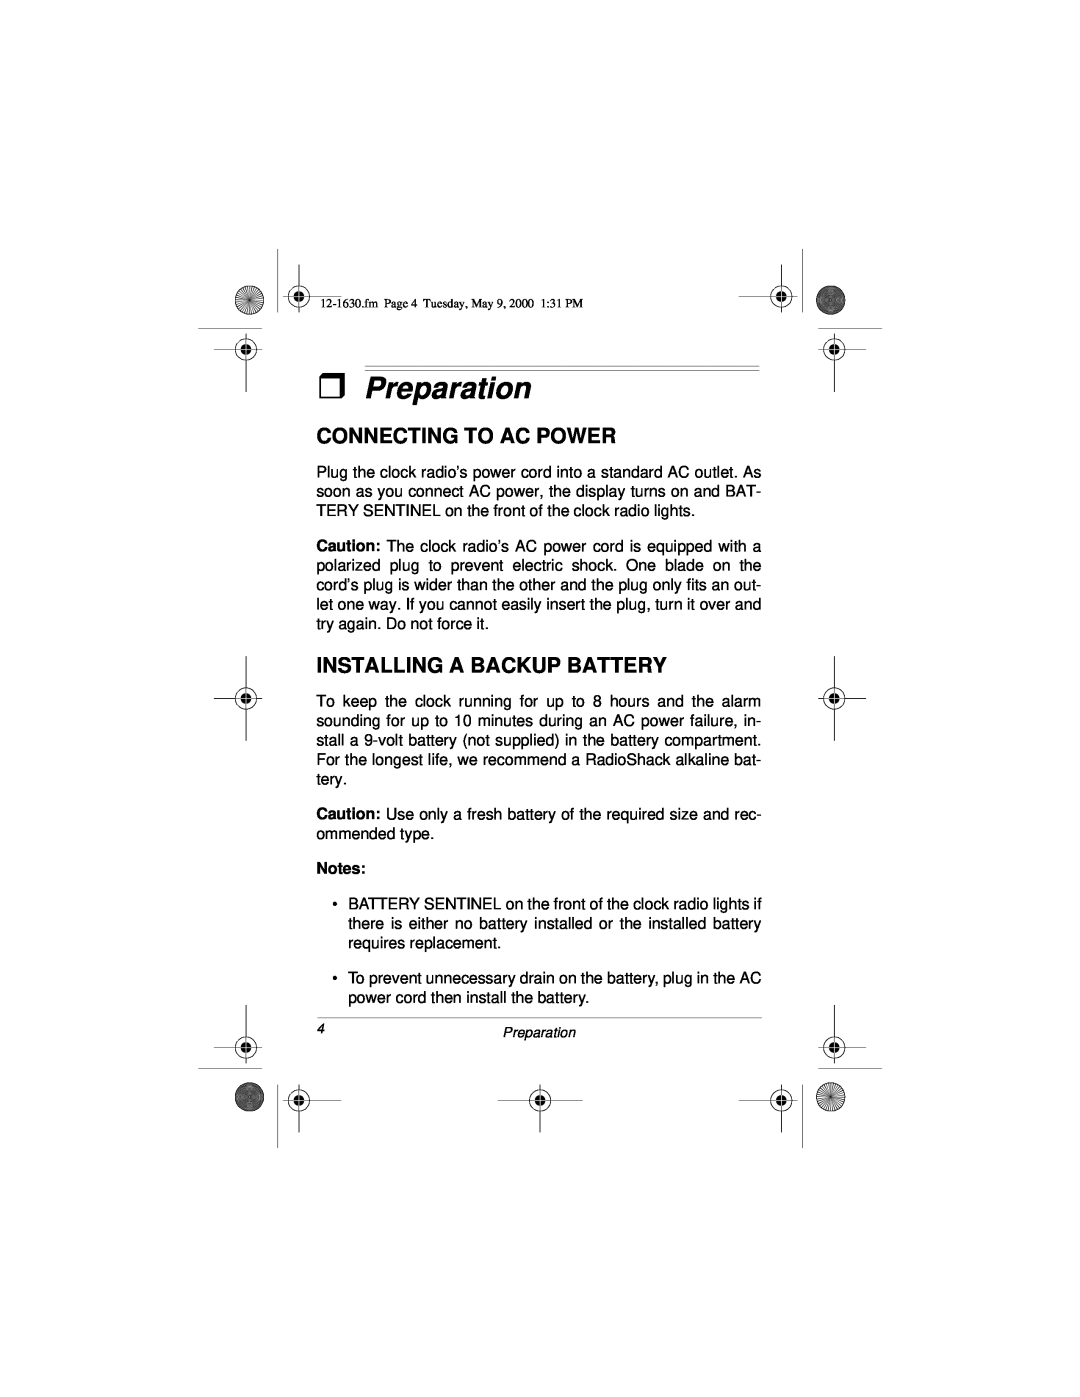 Radio Shack 12-1630 owner manual ˆ Preparation, Connecting To Ac Power, Installing A Backup Battery 